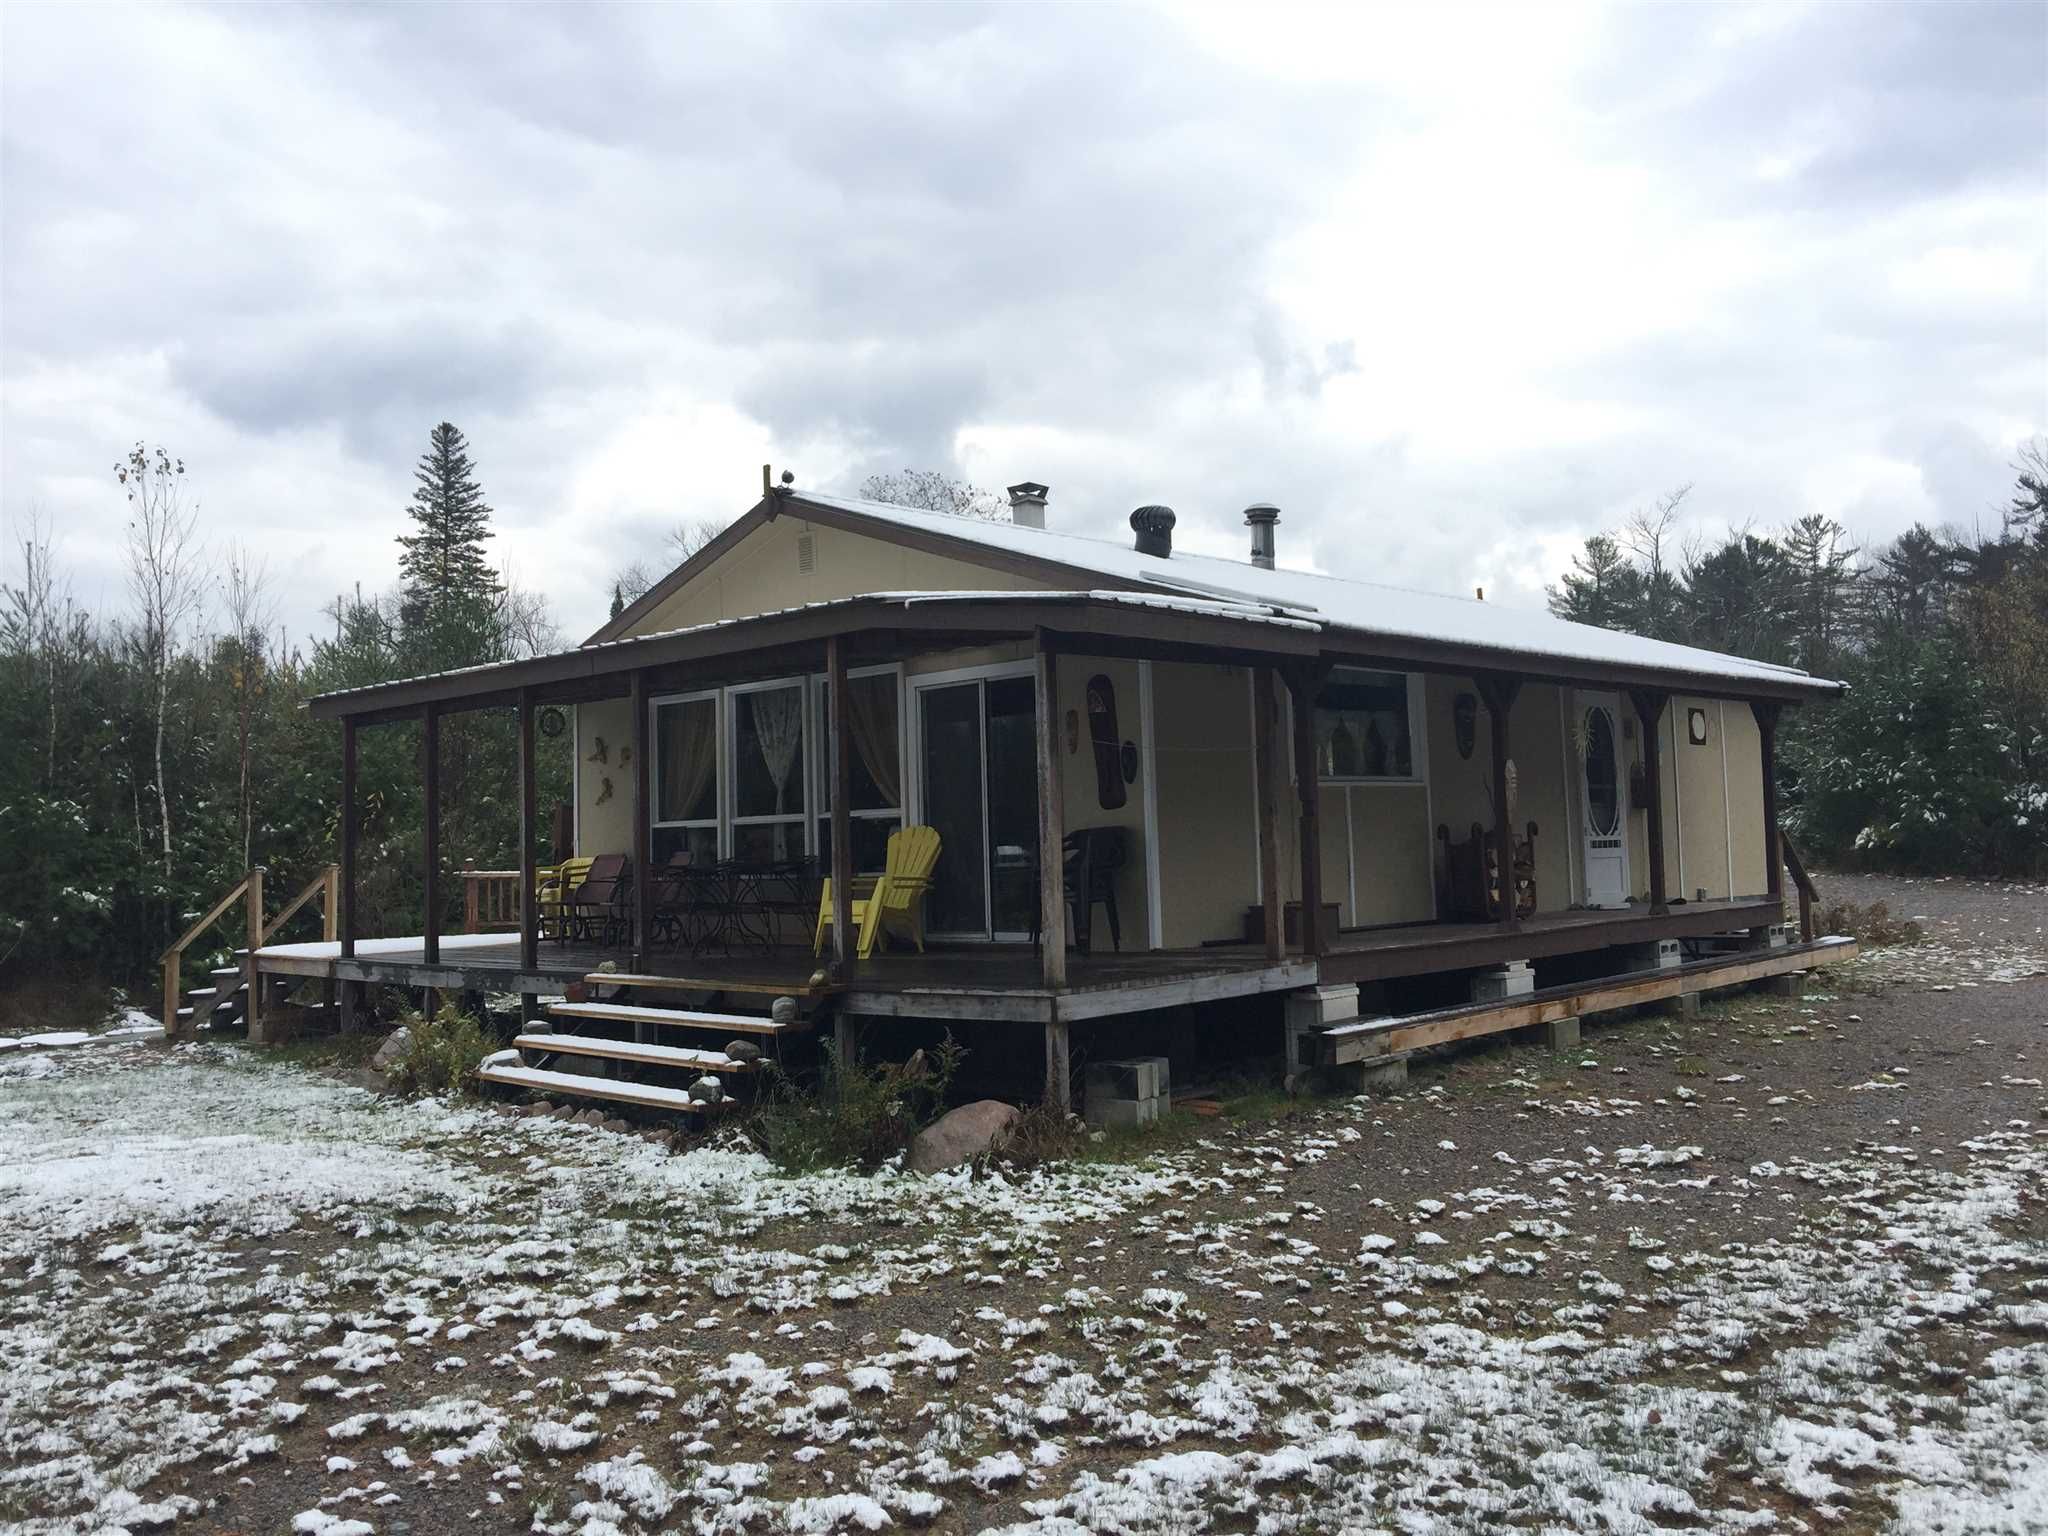 Main Photo: 109 MCBAIN Road in BRUCE MINES: Detached for sale : MLS®# SM120651